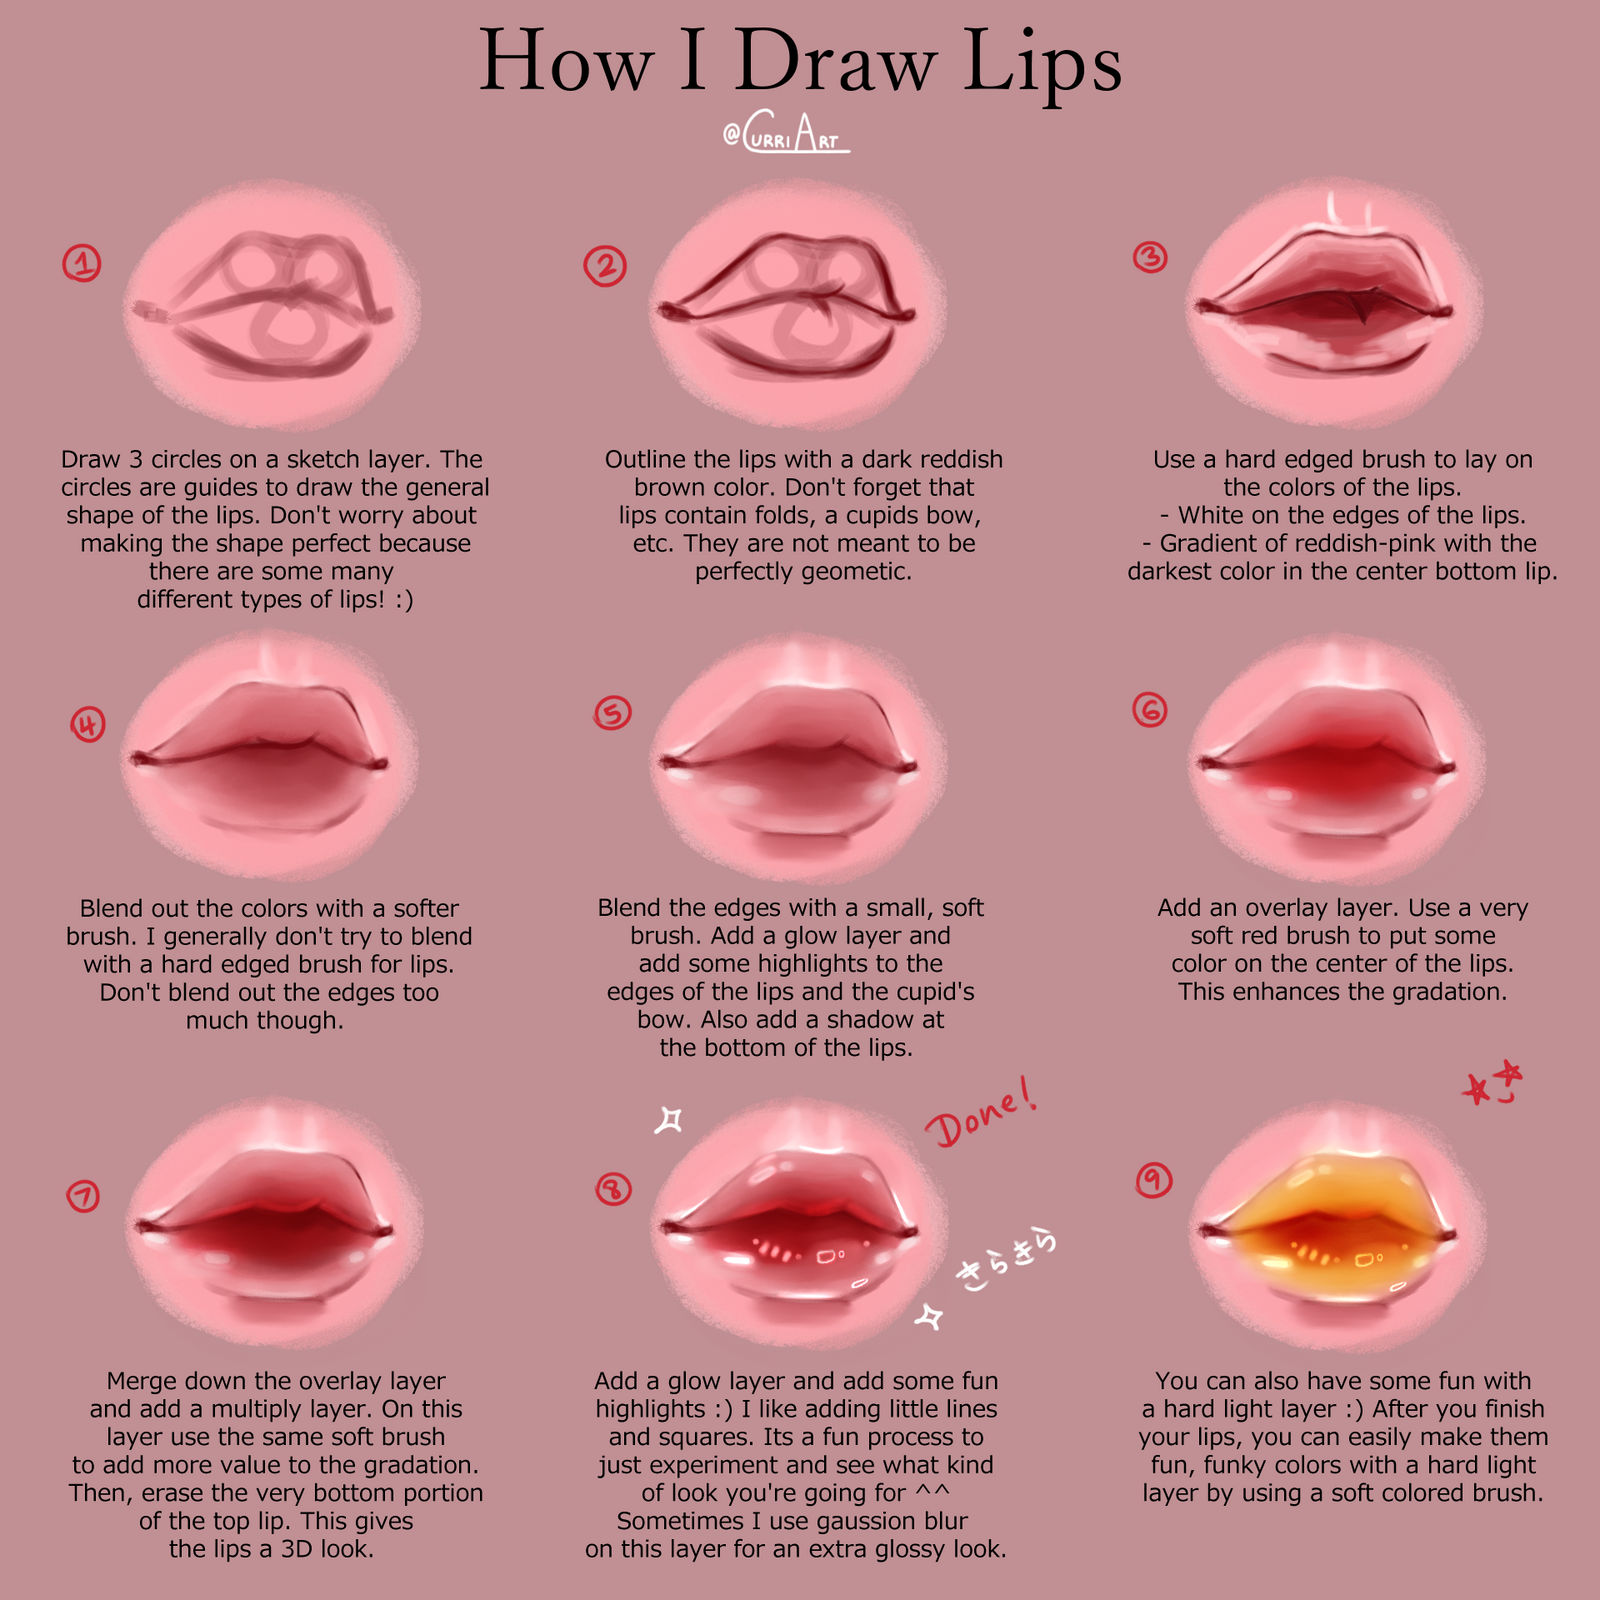 How to draw your Cupid's bow for lips?